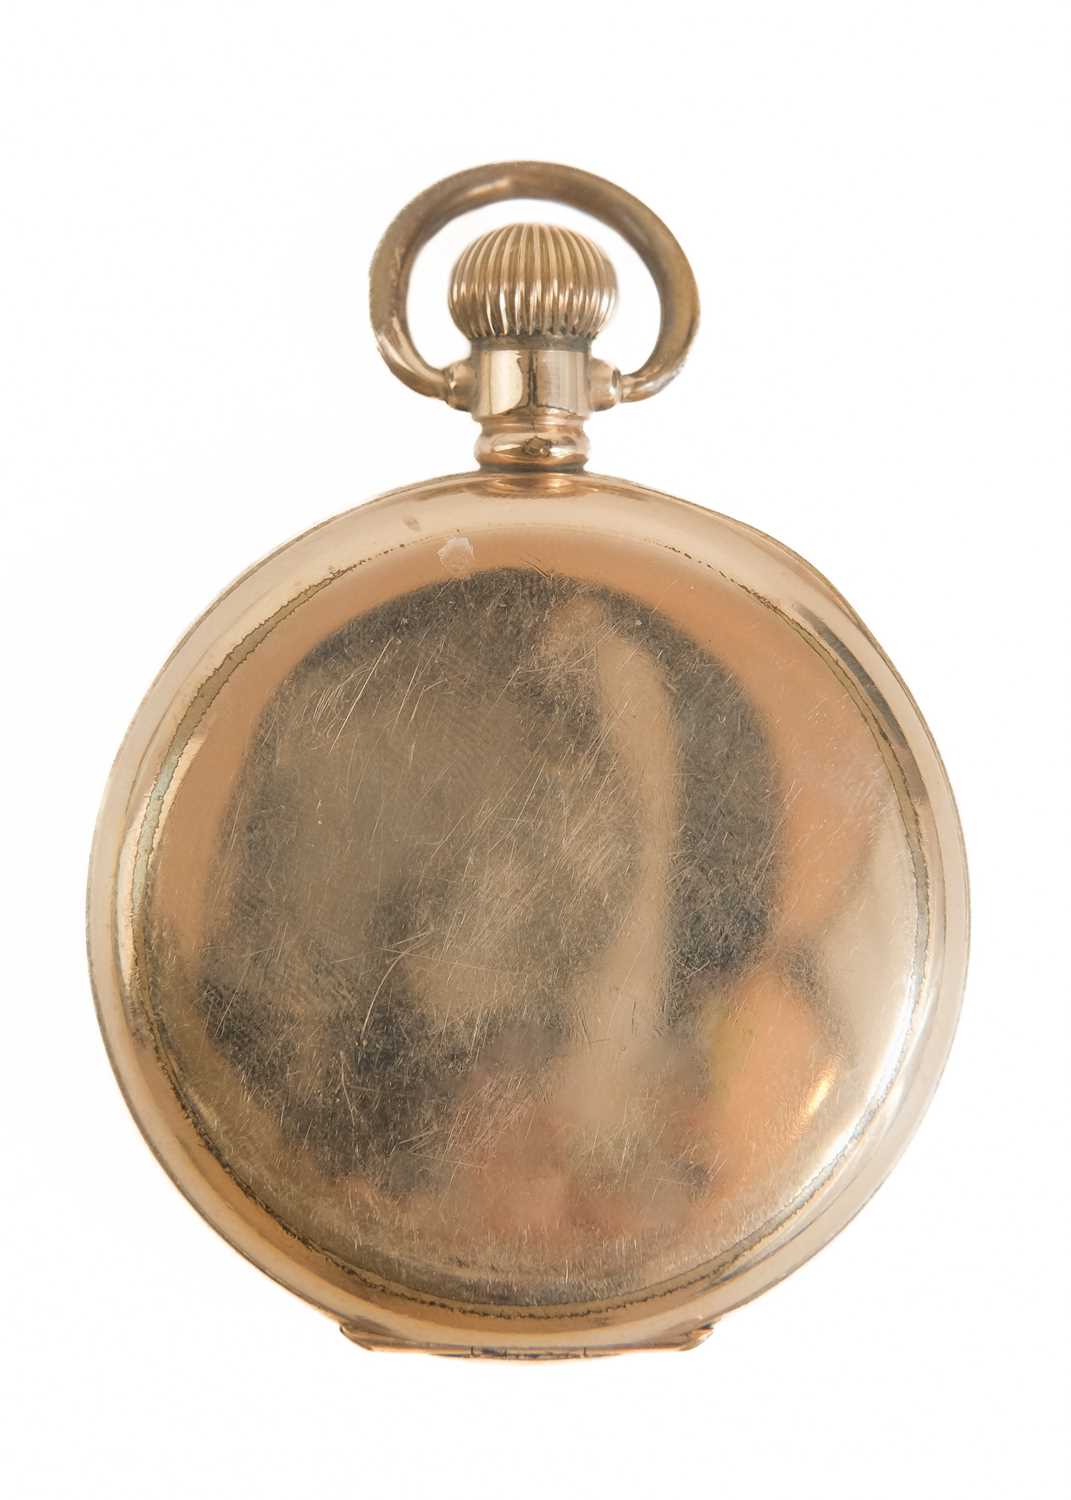 OMEGA - A gold-plated open face crown wind lever pocket watch. - Image 3 of 7